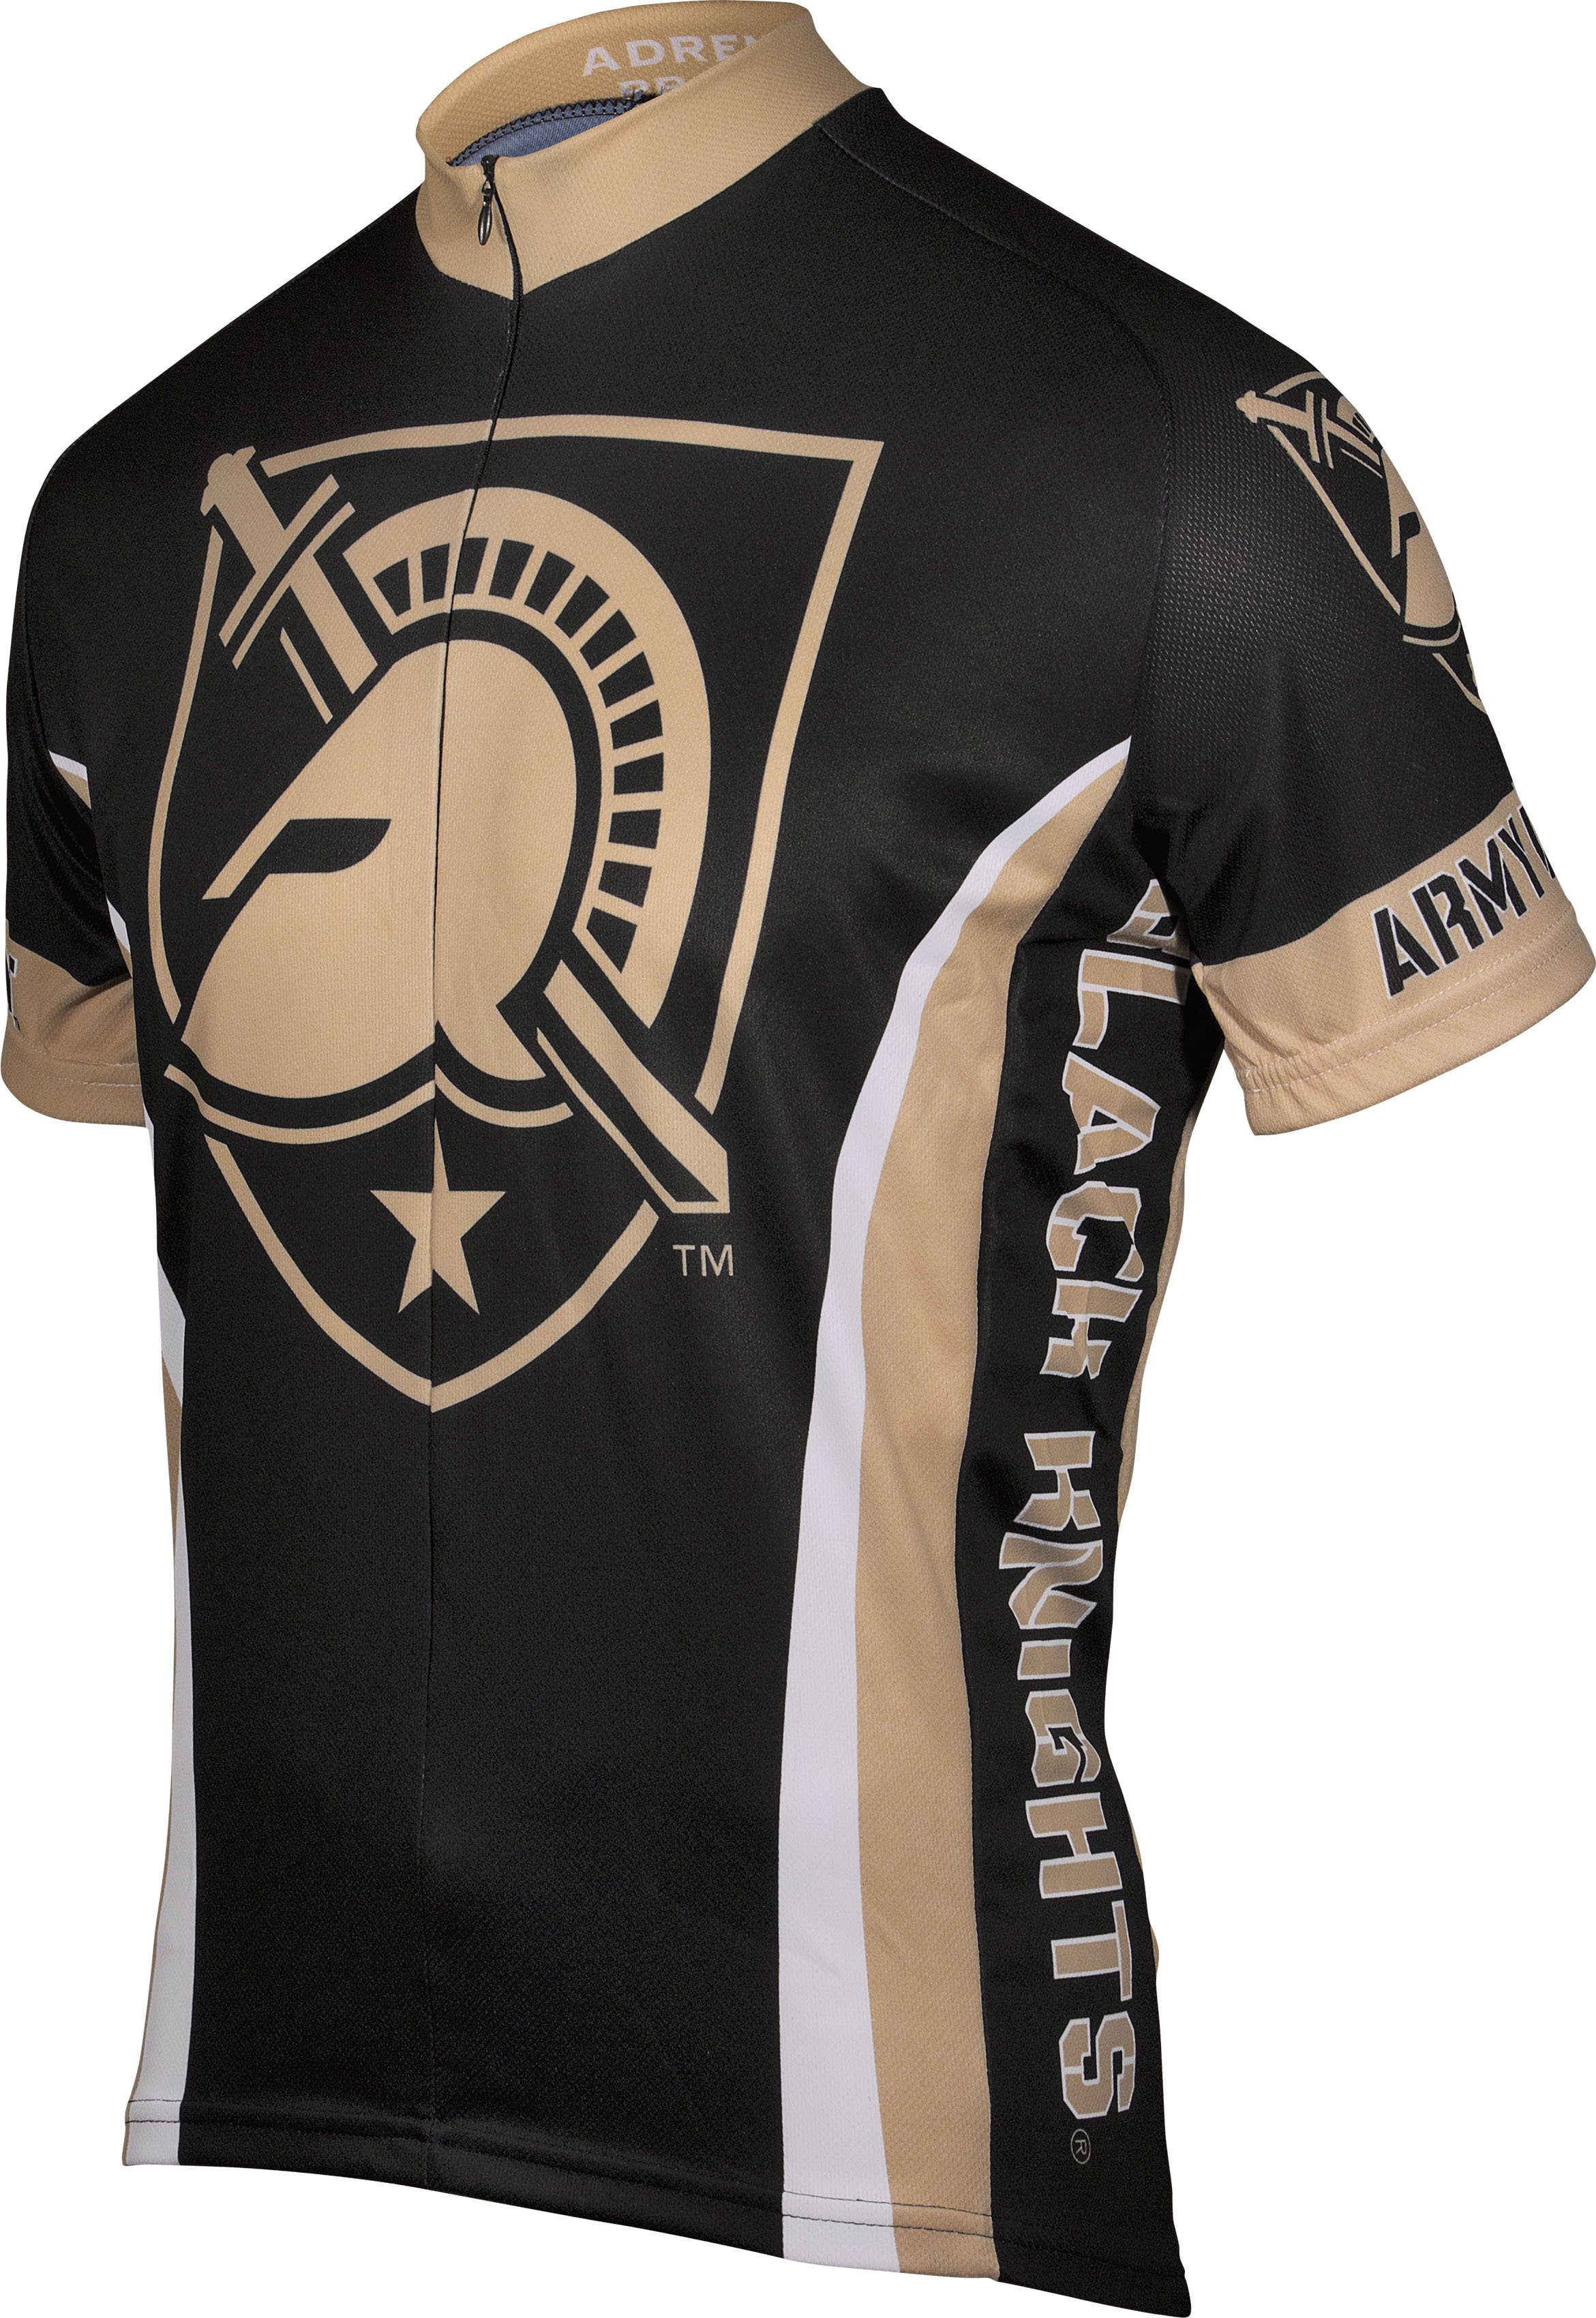 West Point Military Academy (ARMY) Cycling Jersey